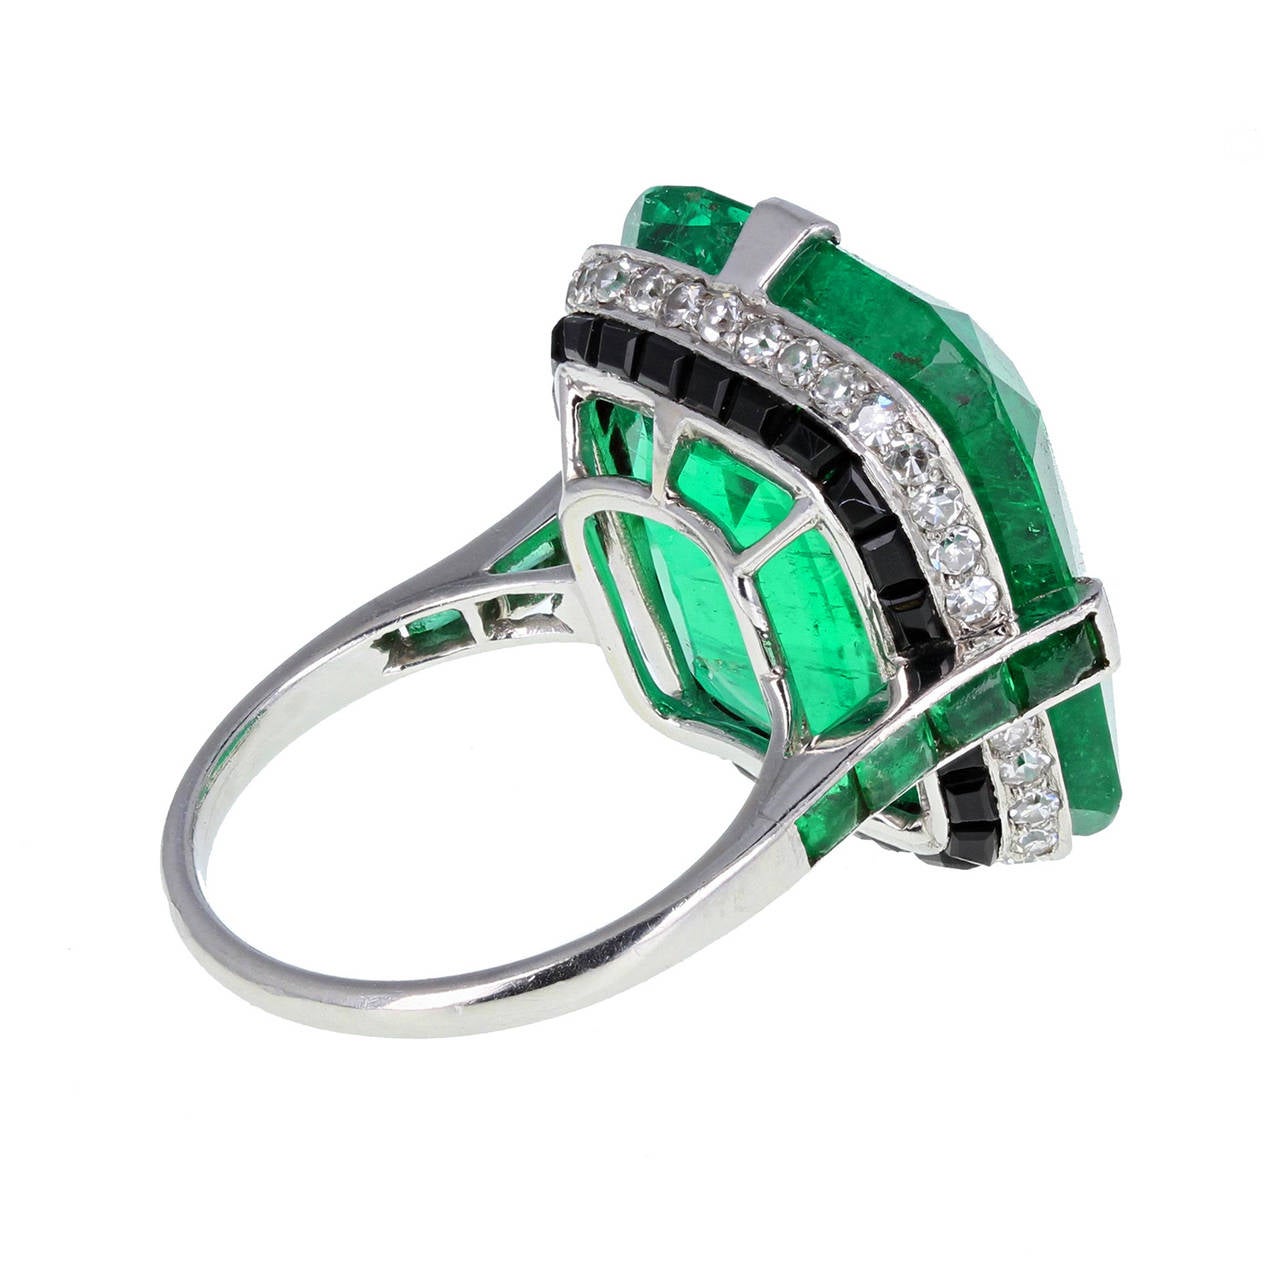 Cartier Important Art Deco Colombian Emerald Onyx Platinum Cocktail Ring For Sale 1